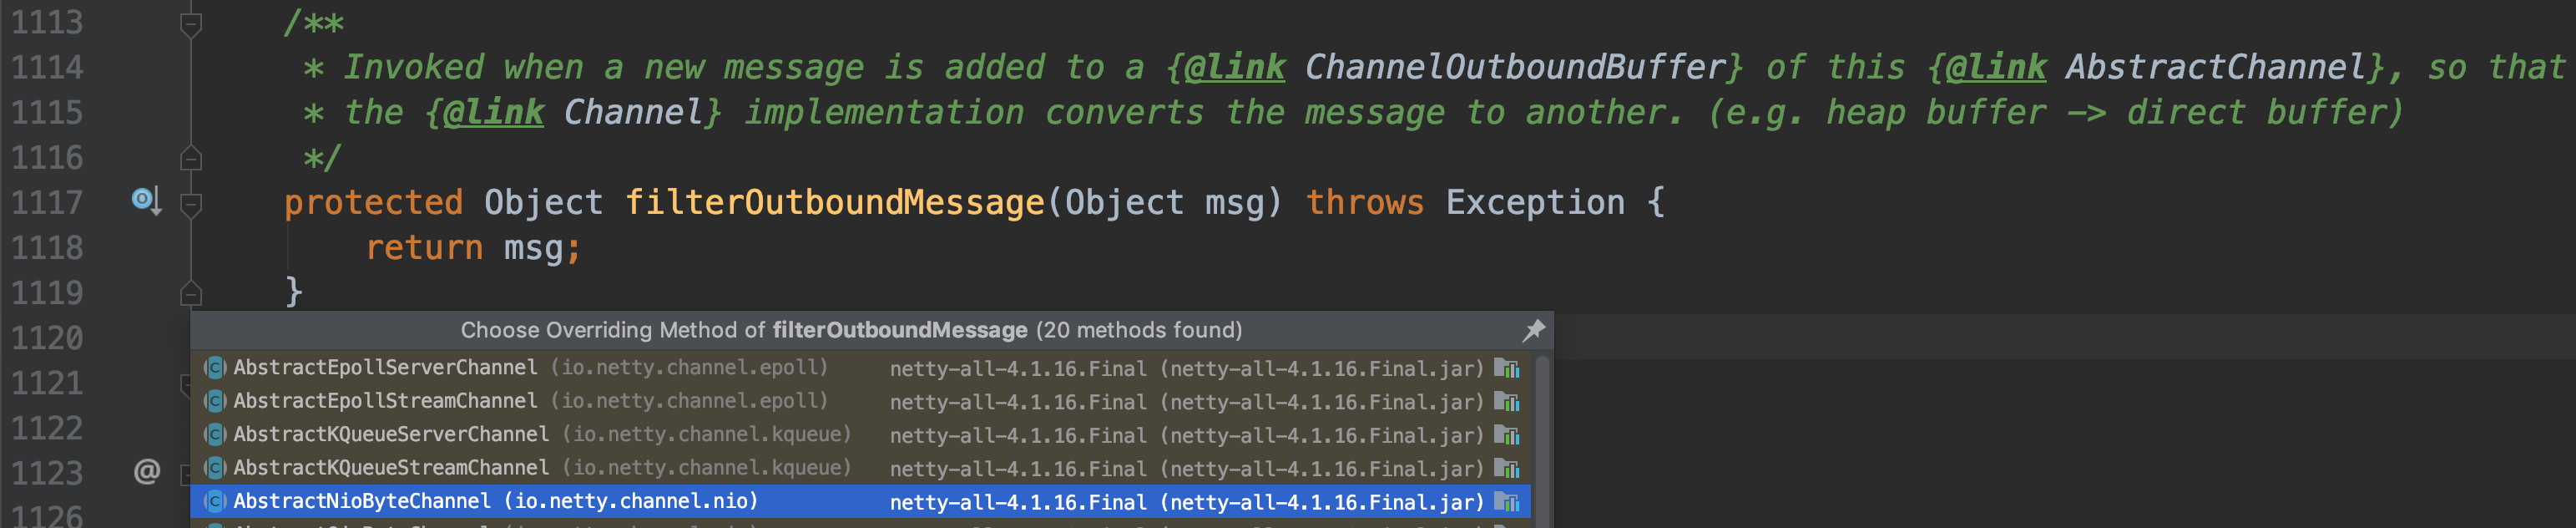 AbstractChannel#filterOutboundMessage(Object msg)